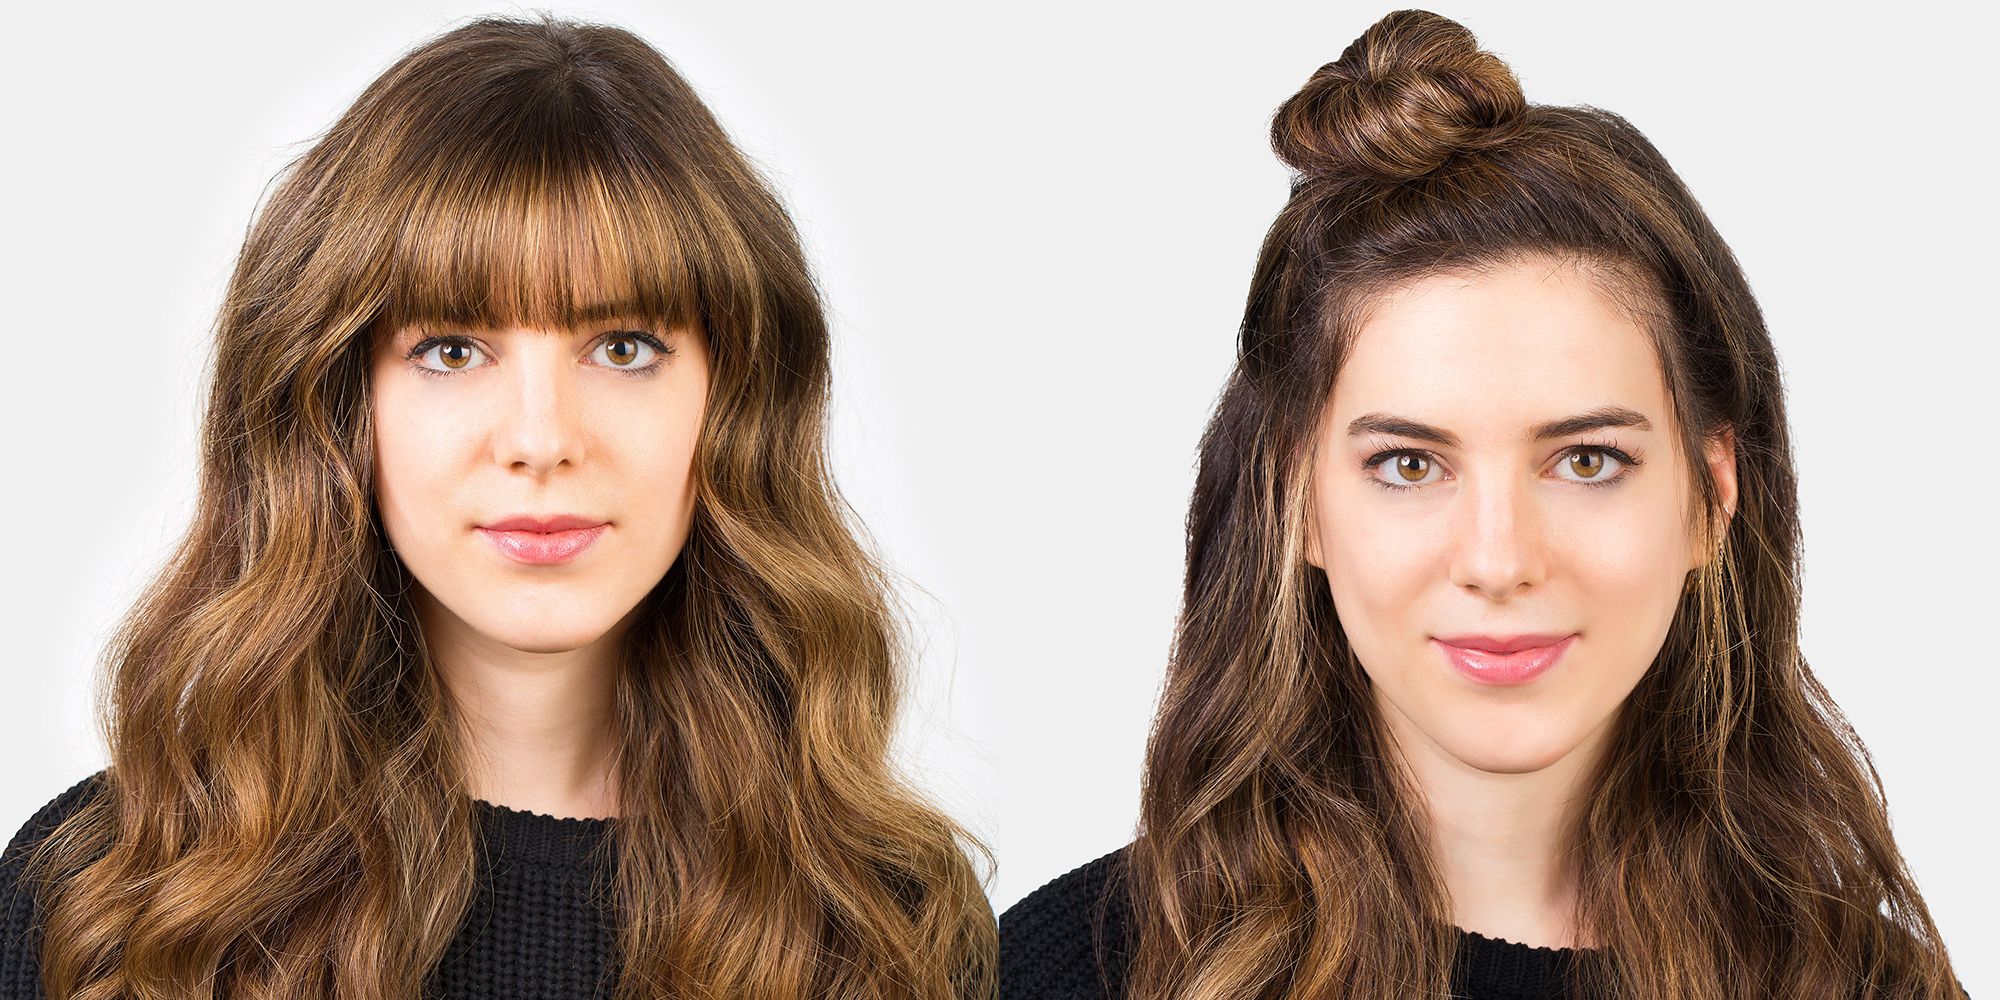 how to style bangs - 5 hairstyles to keep your bangs out of